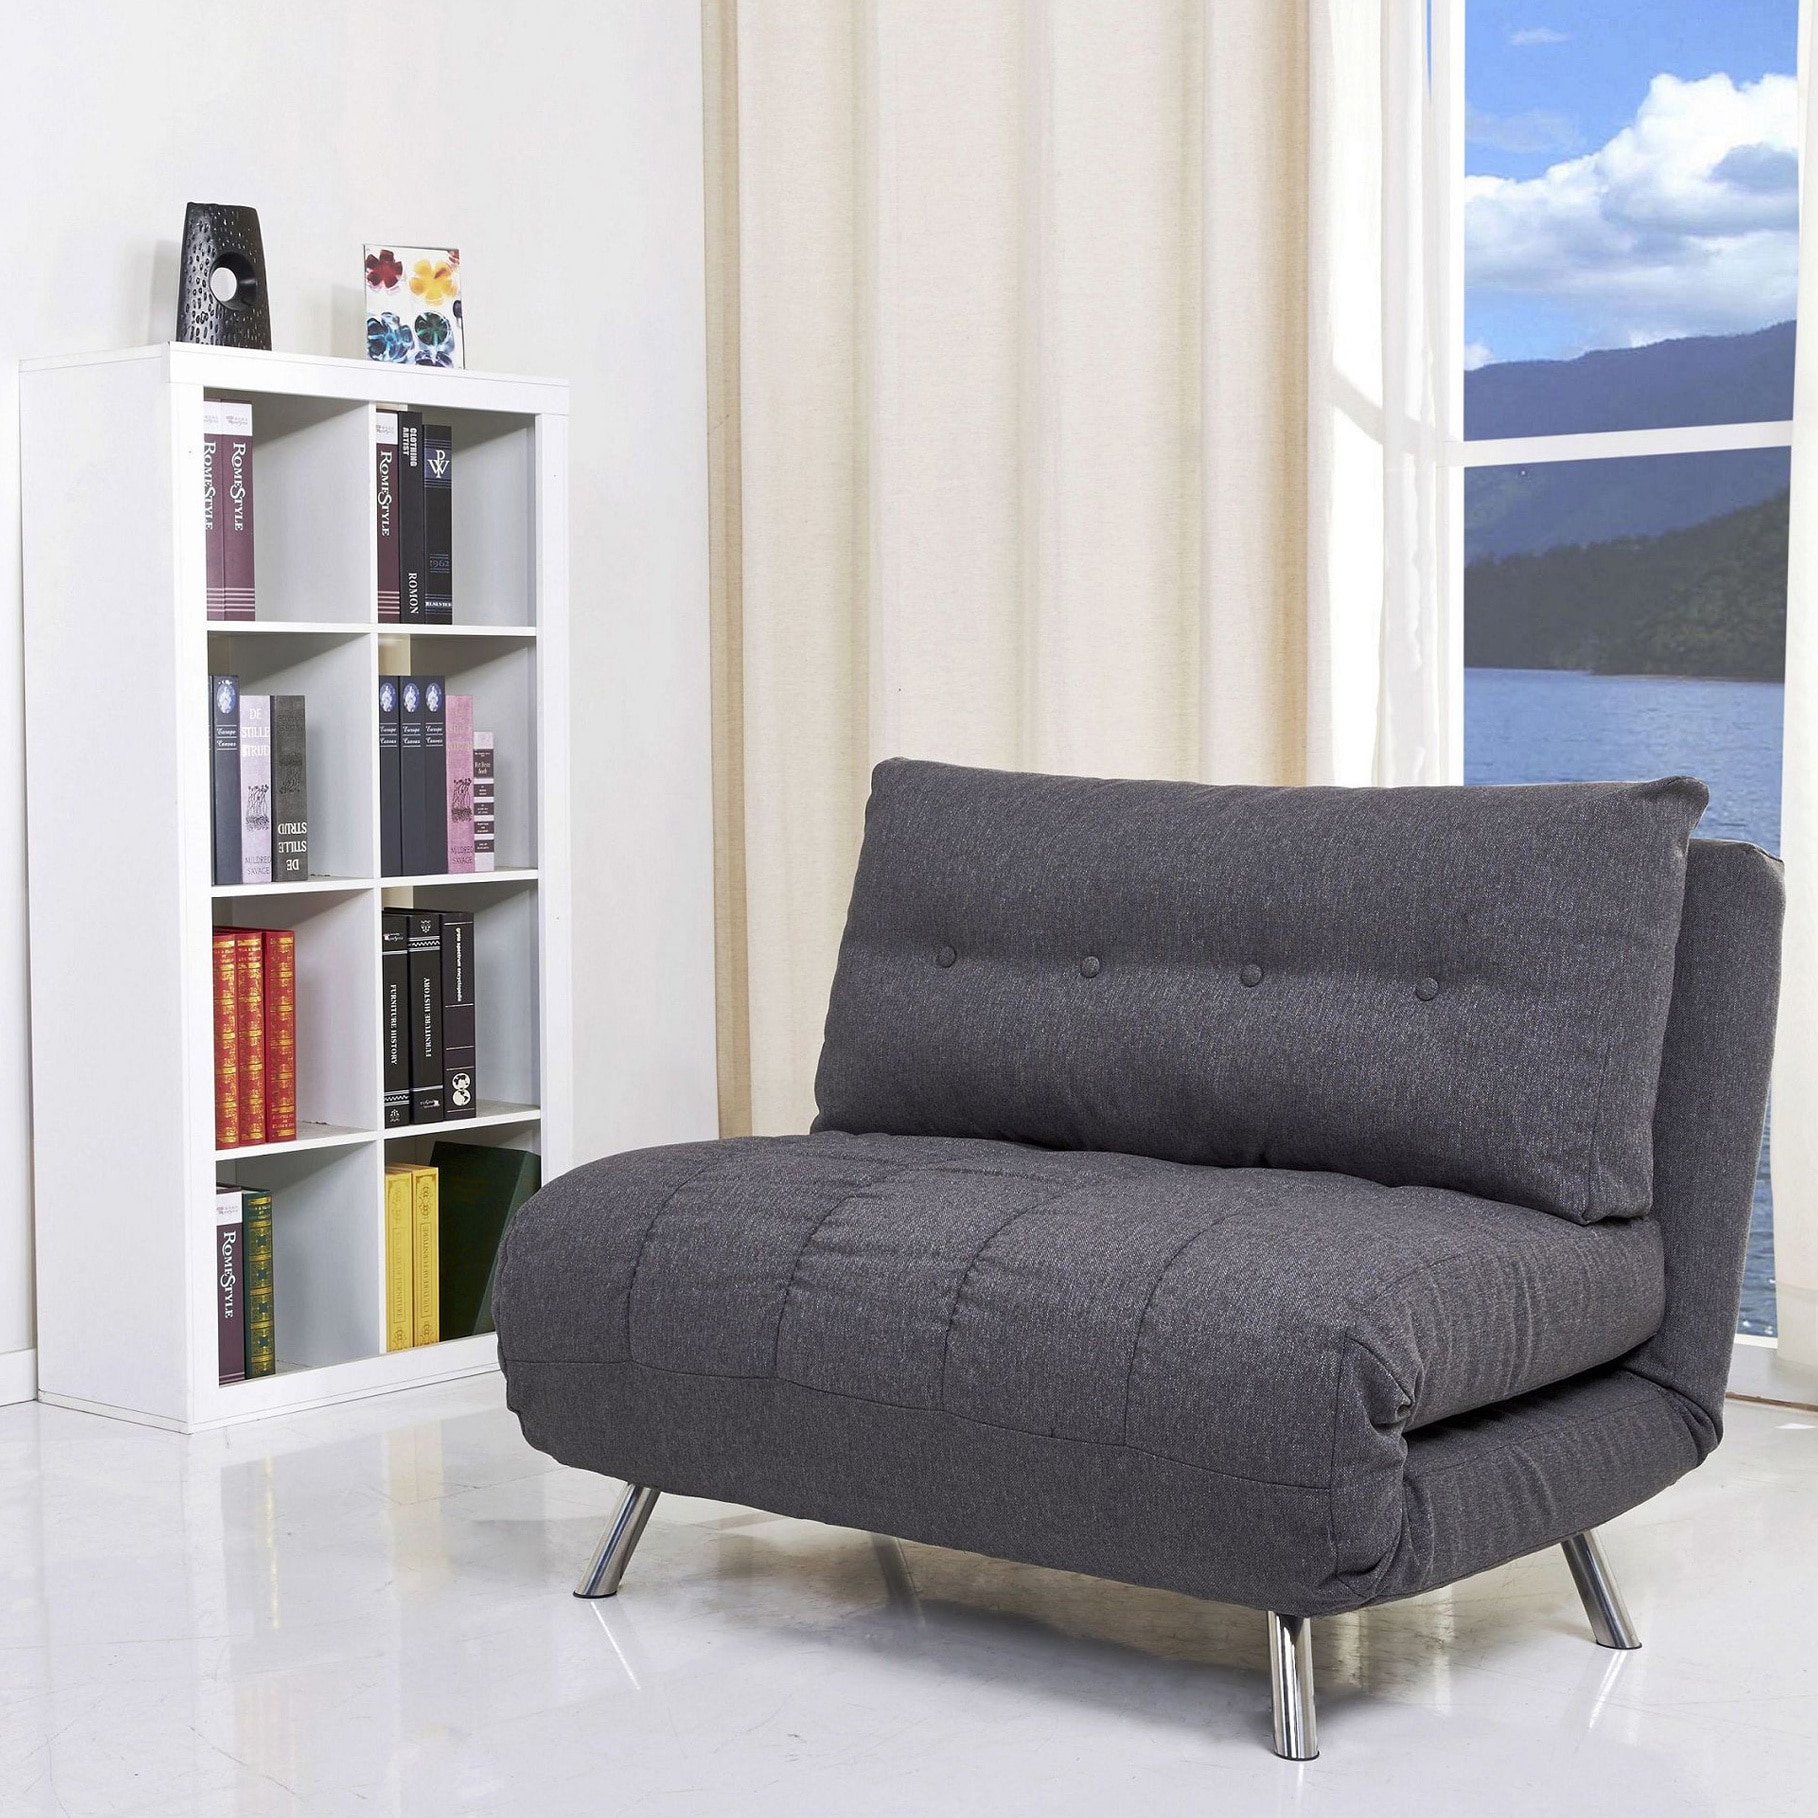 Shop Tampa Gray Convertible Large Chair/ Bed - Free Shipping Today